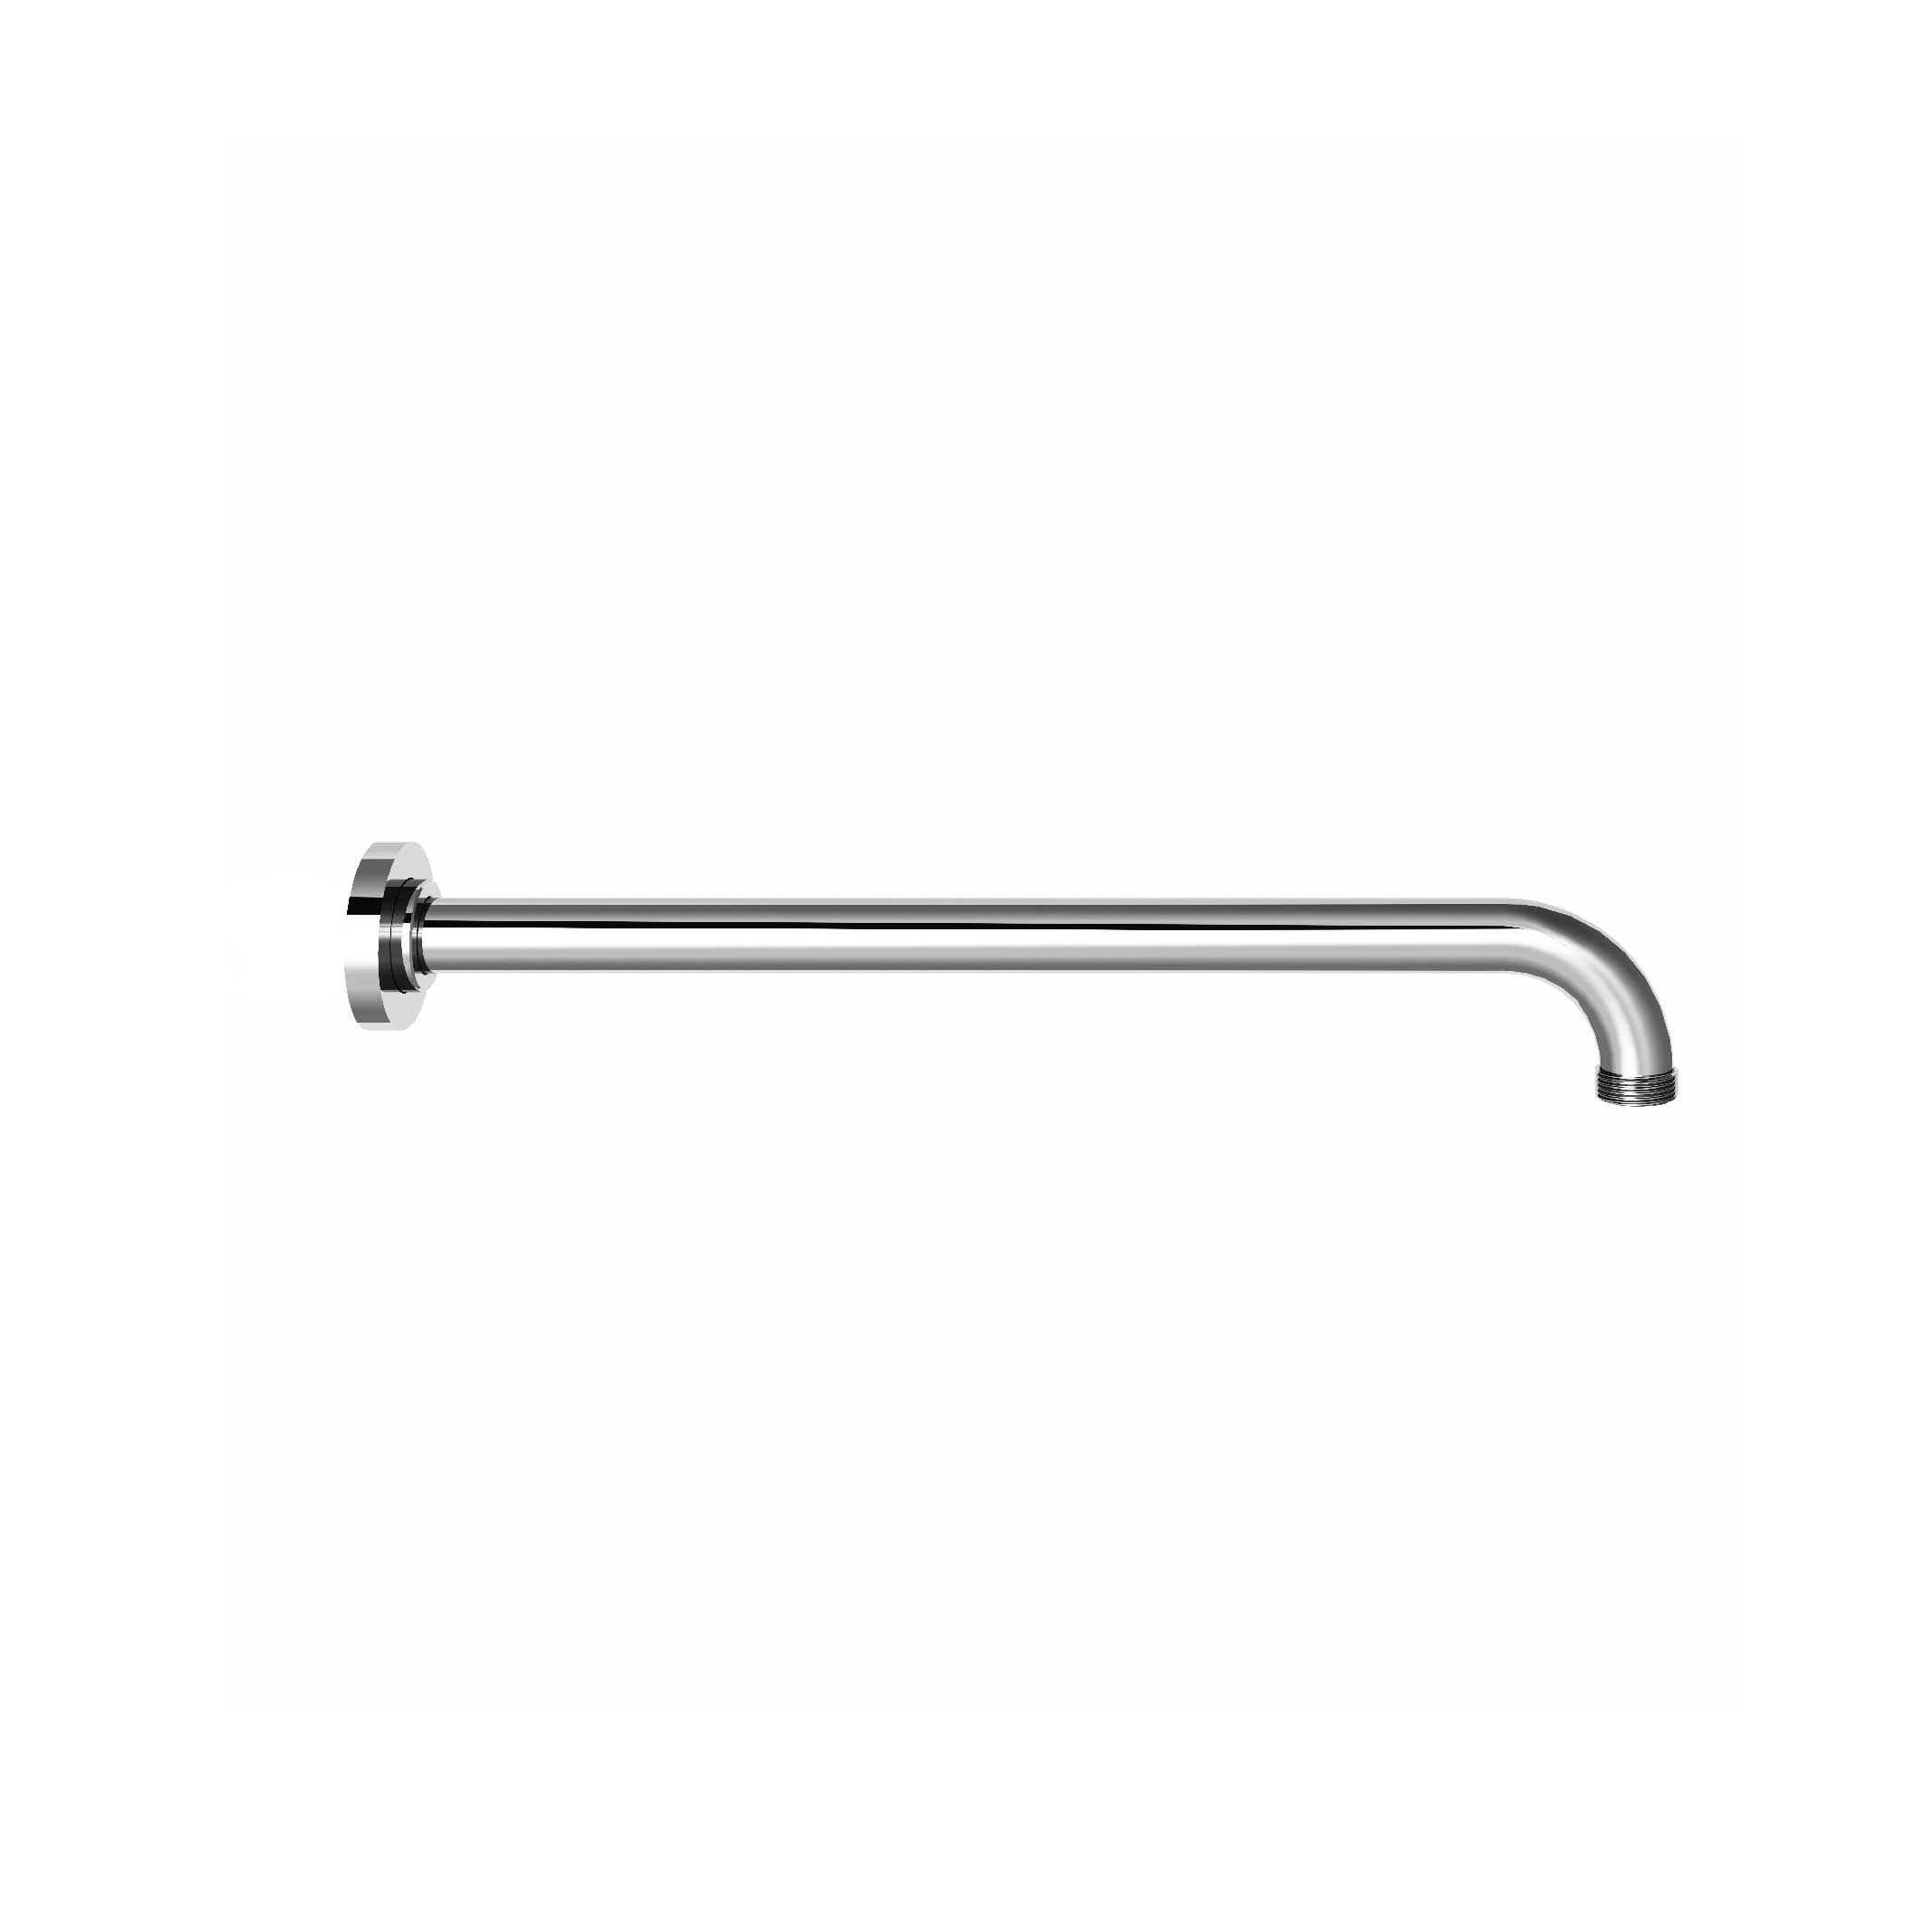 M91-2W301 Wall mounted shower arm 300mm